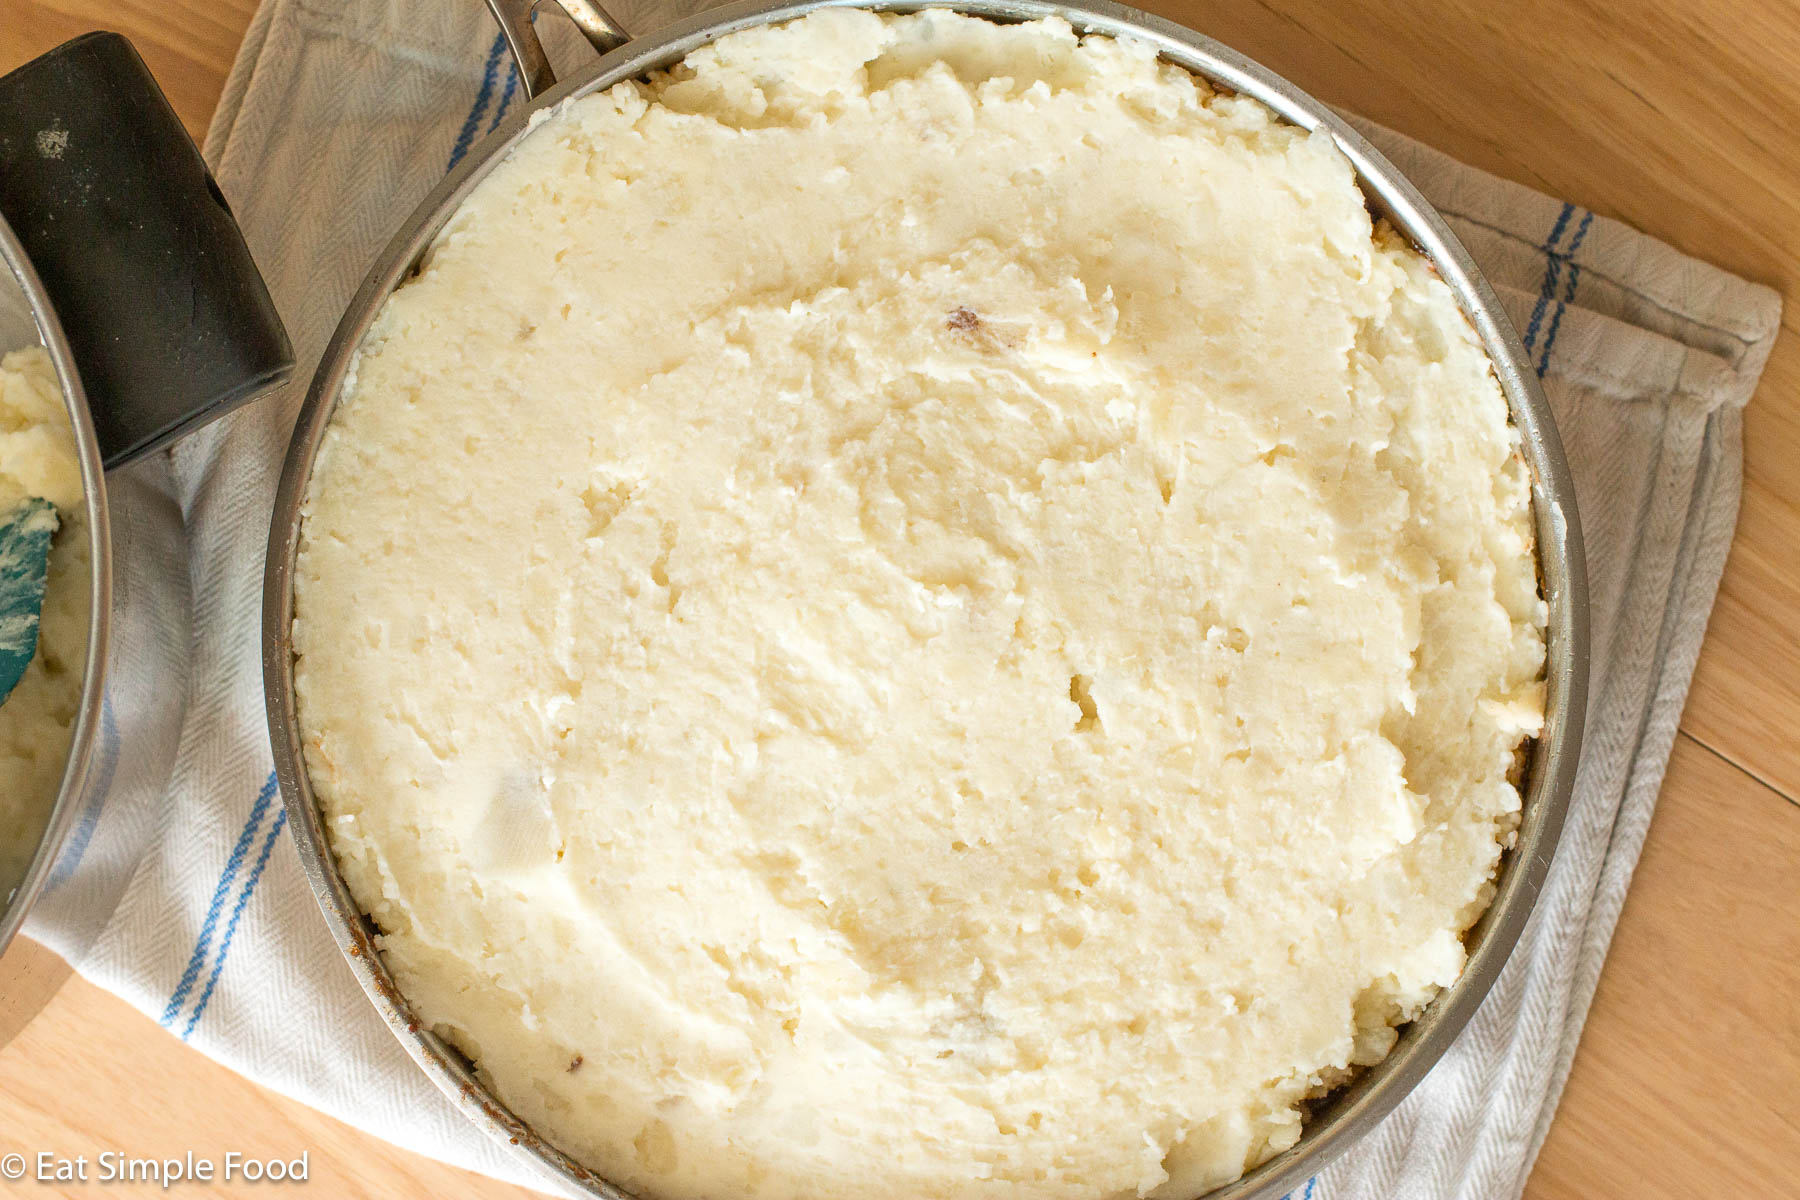 Top down view of a stainless steel pan filled with white mashed potatoes.